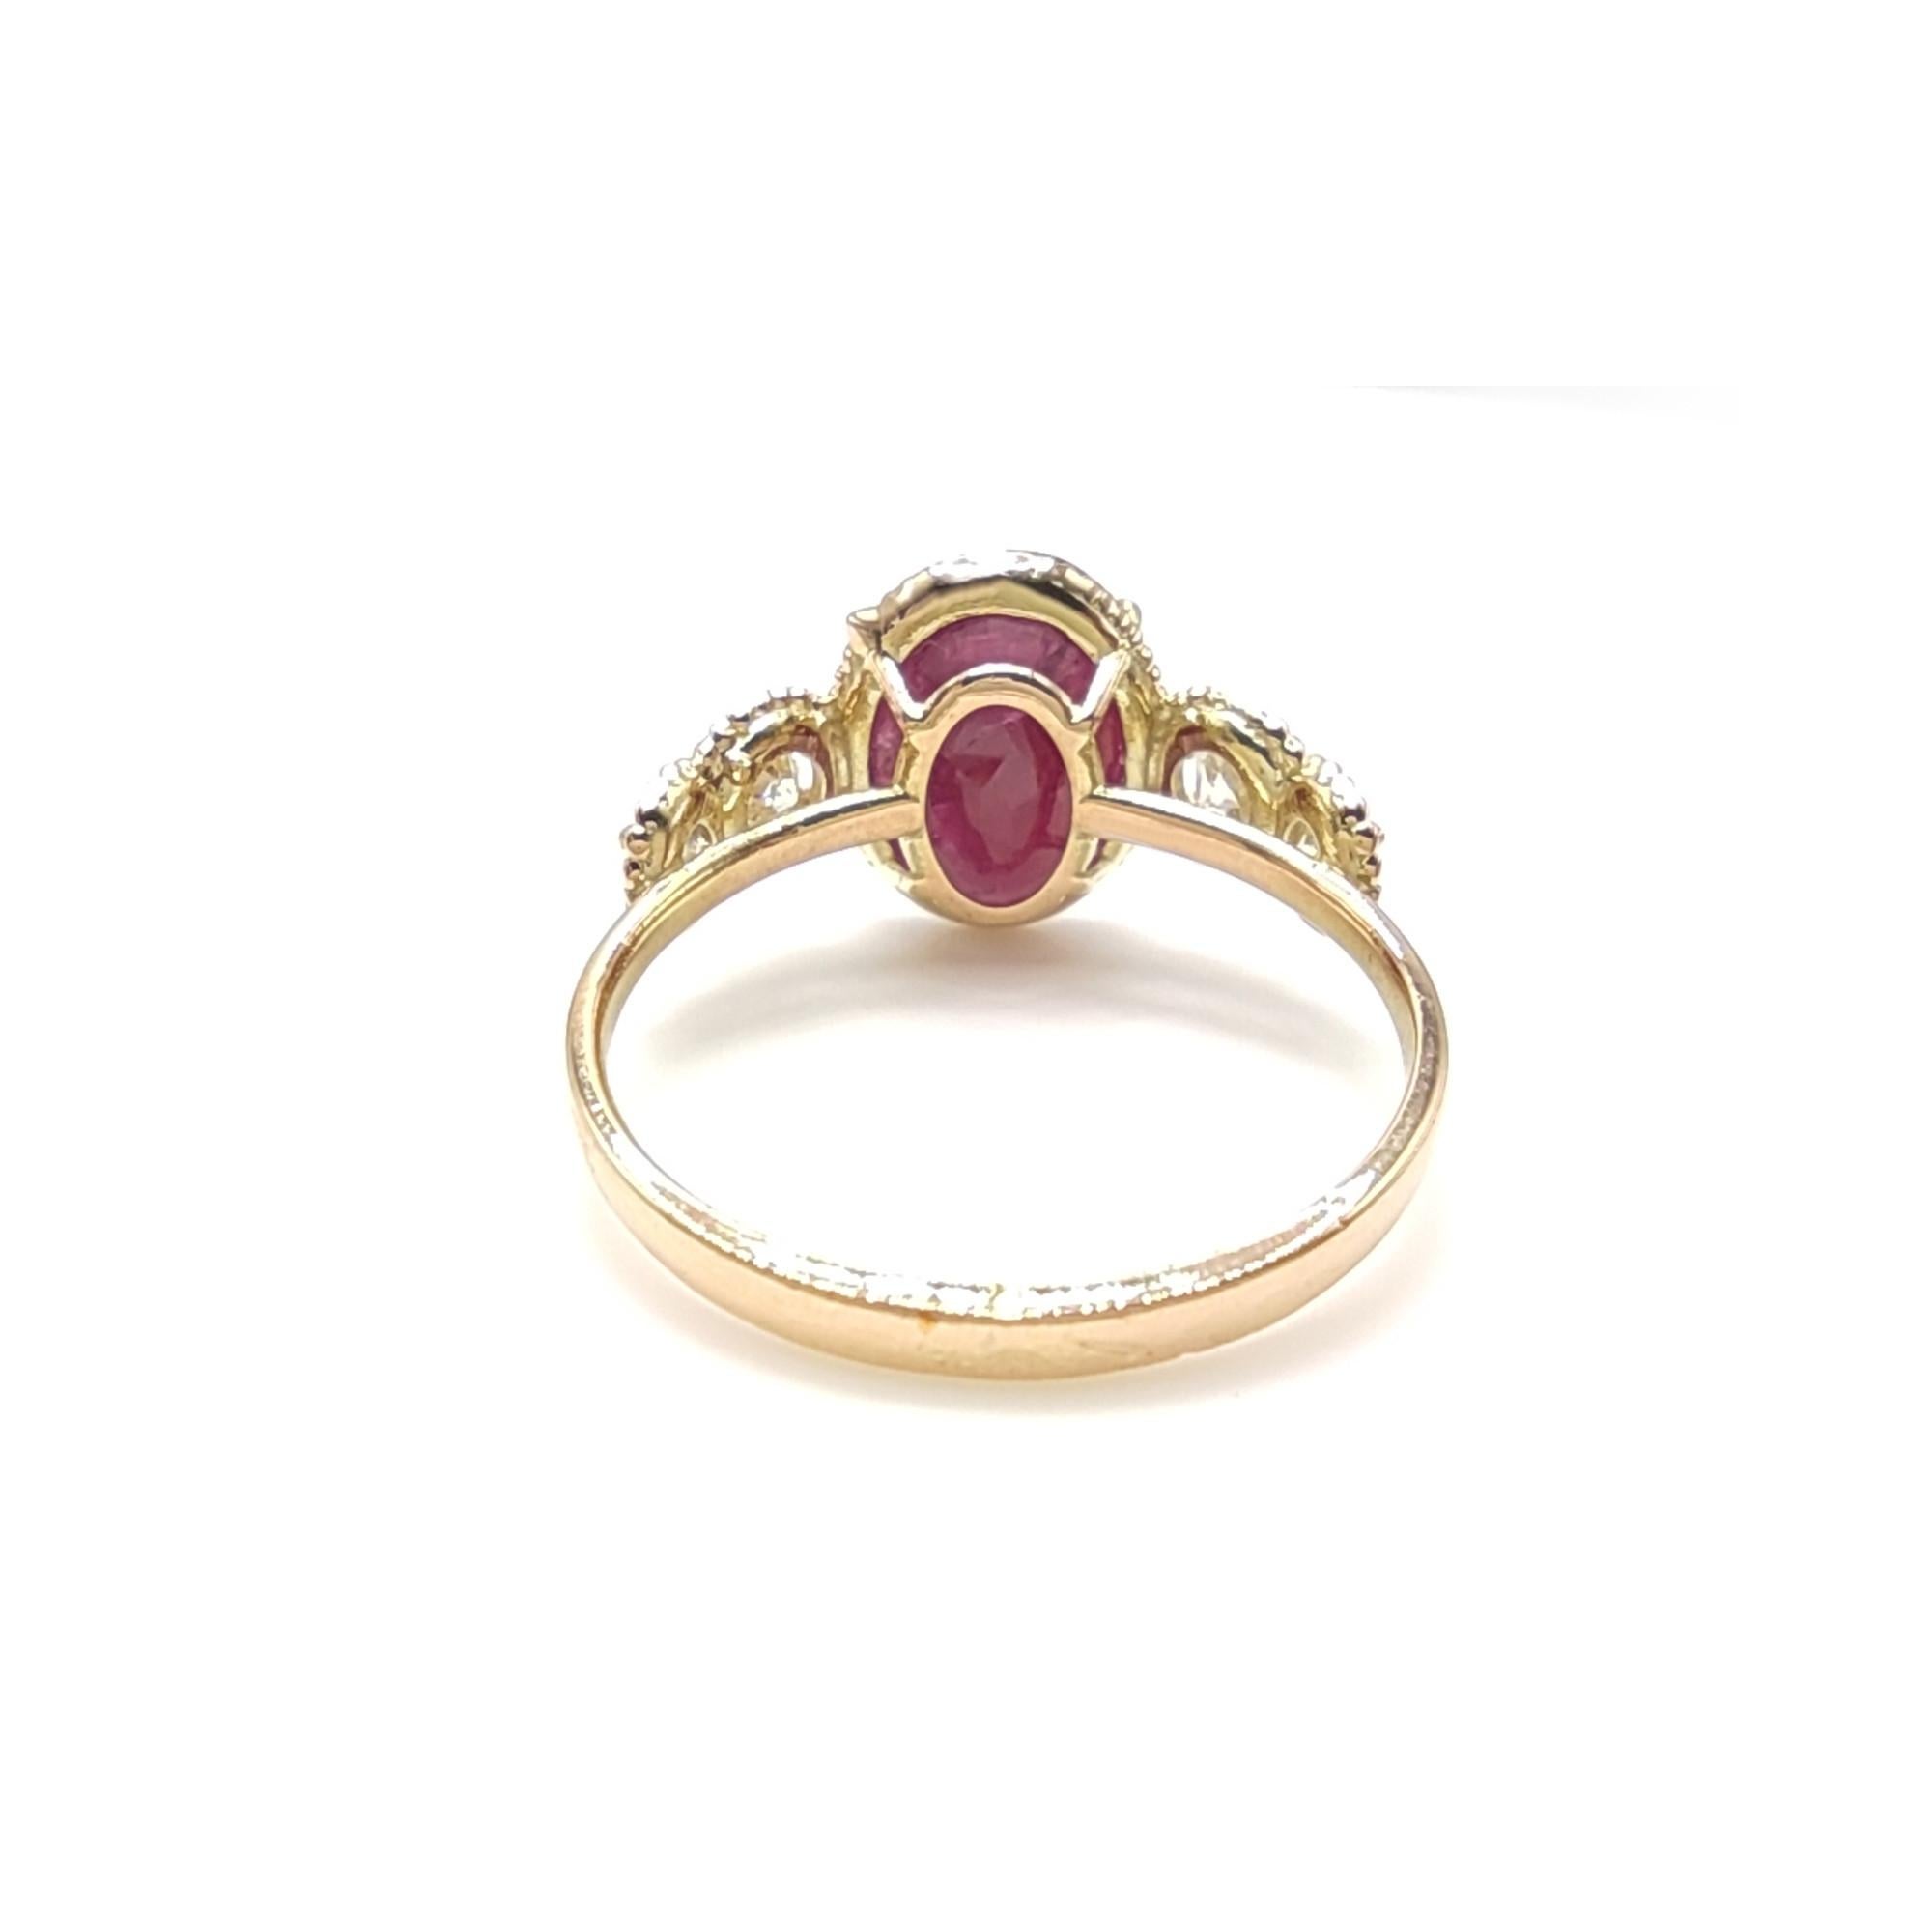 Certified 4.17 carats Ruby Diamond 14K Gold Ring - Contemporary Handmade For Sale 3